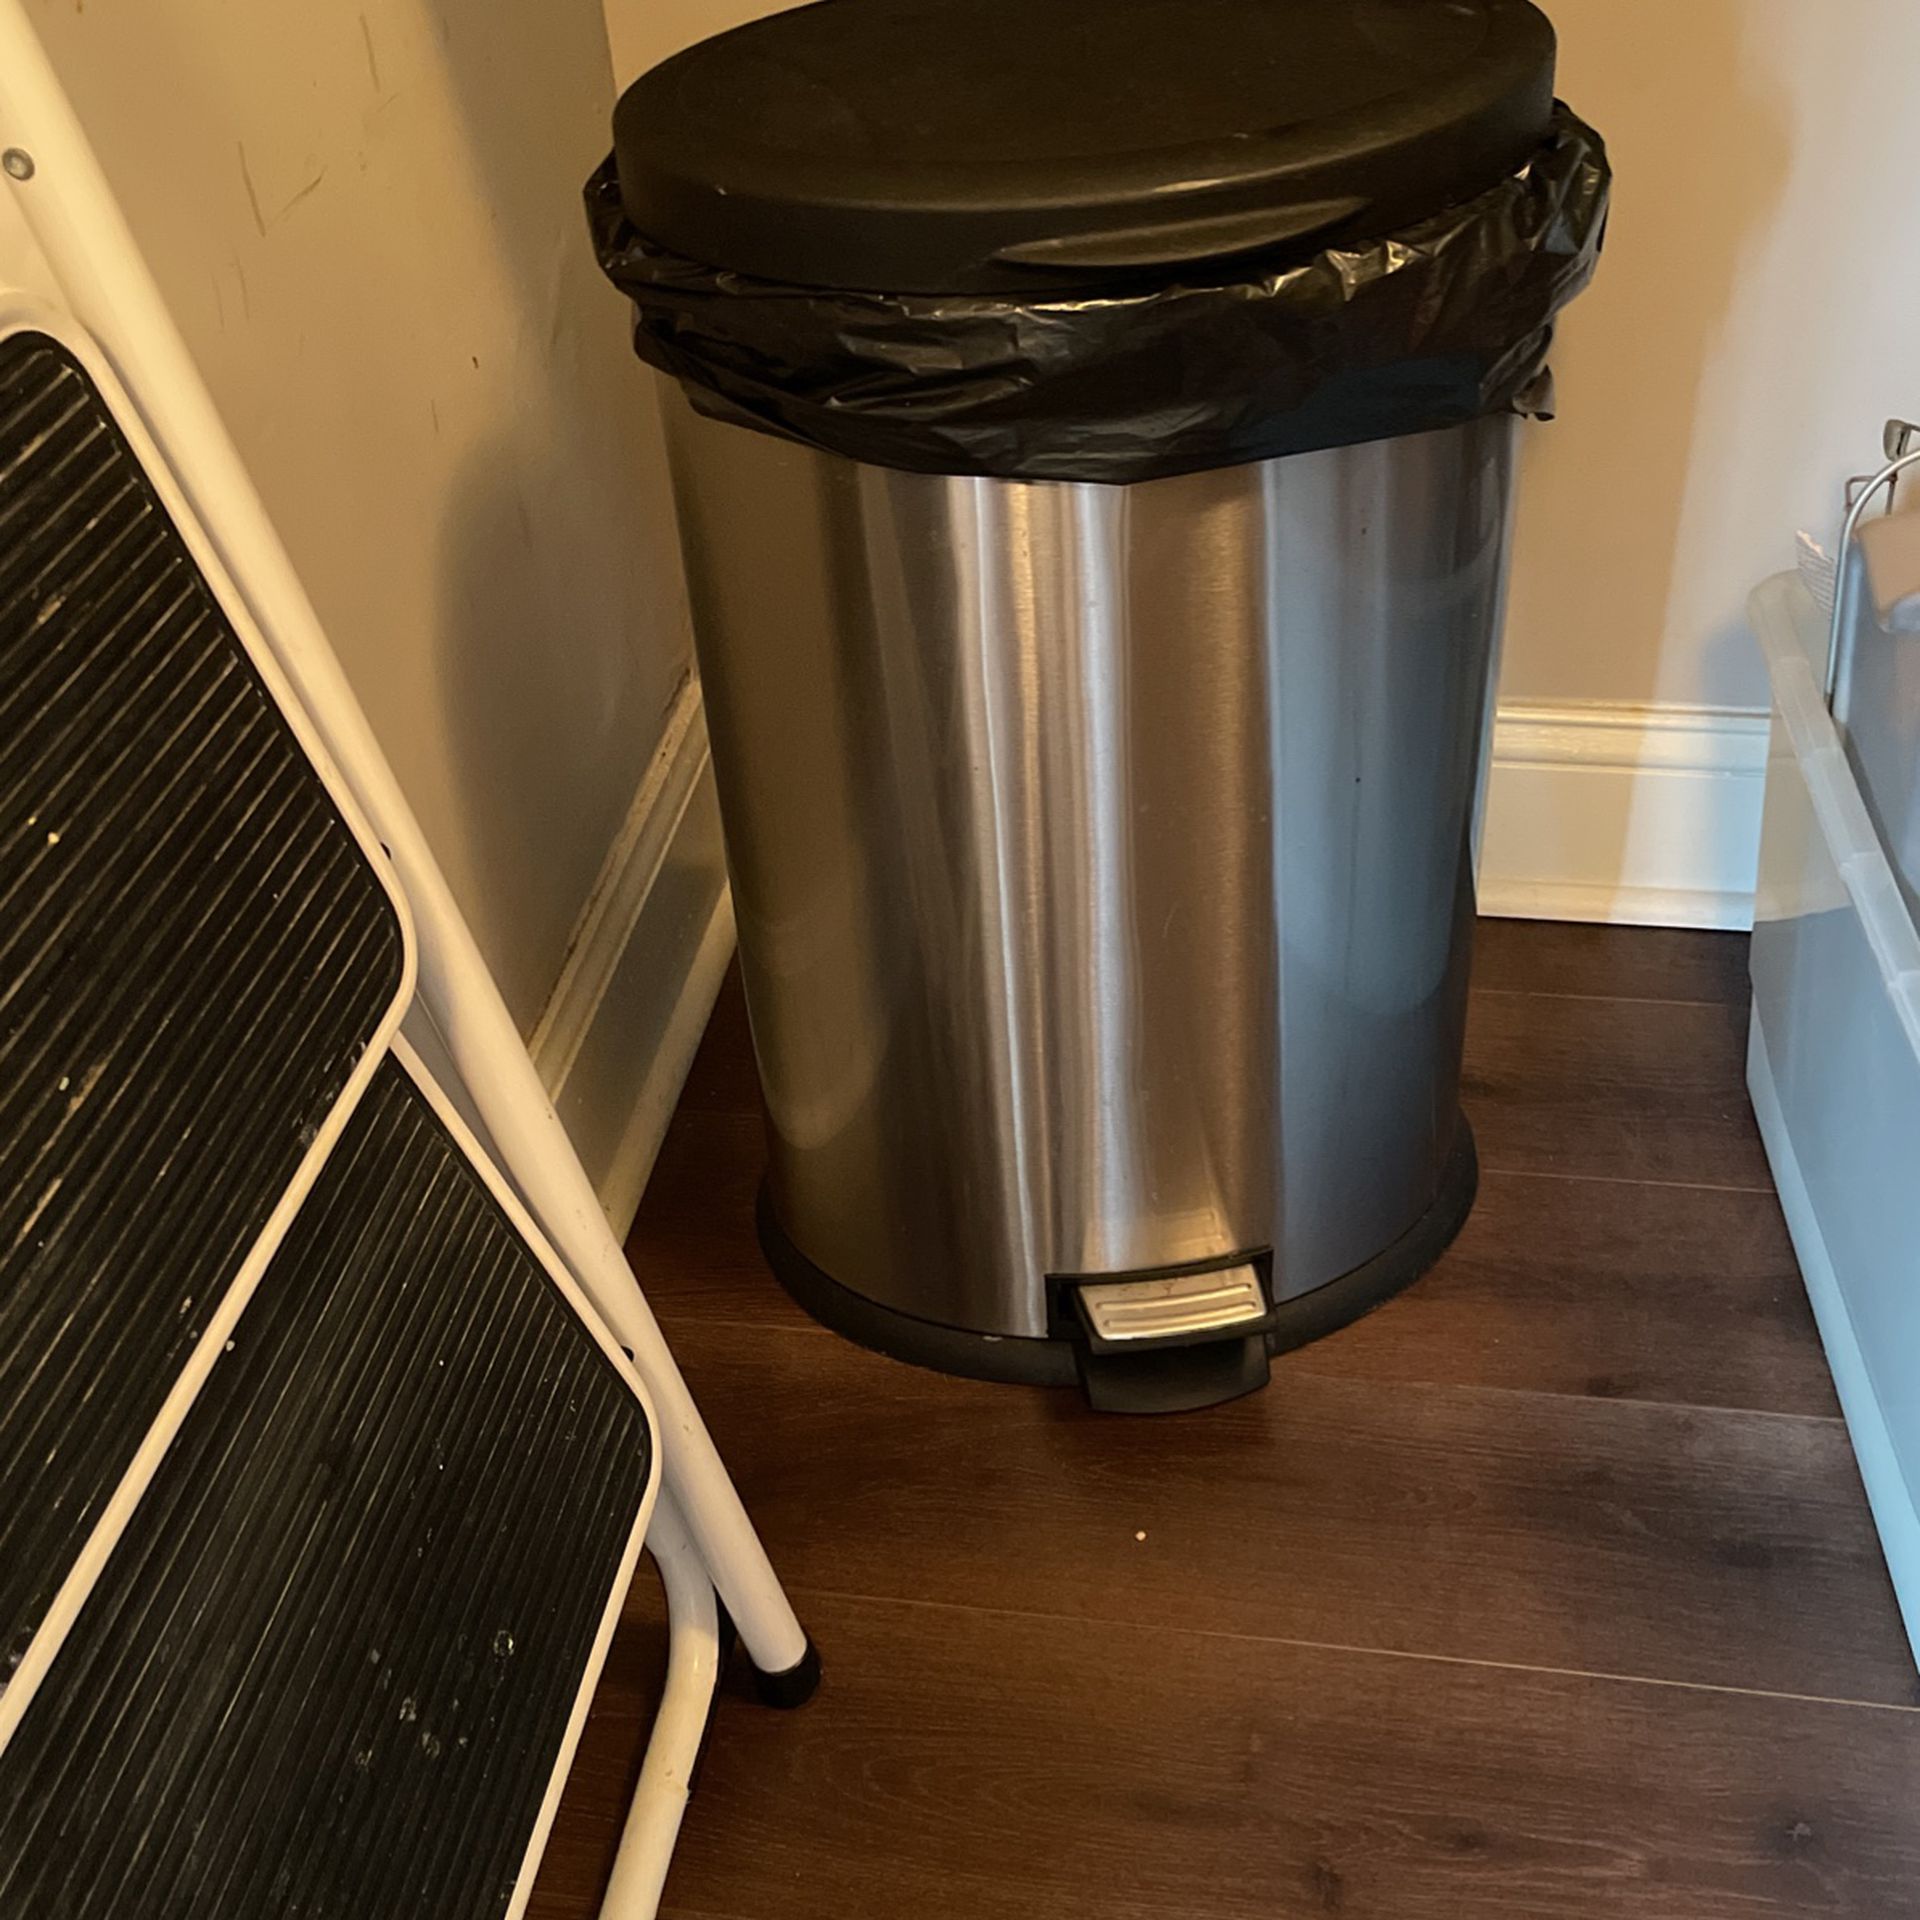 Garbage Can